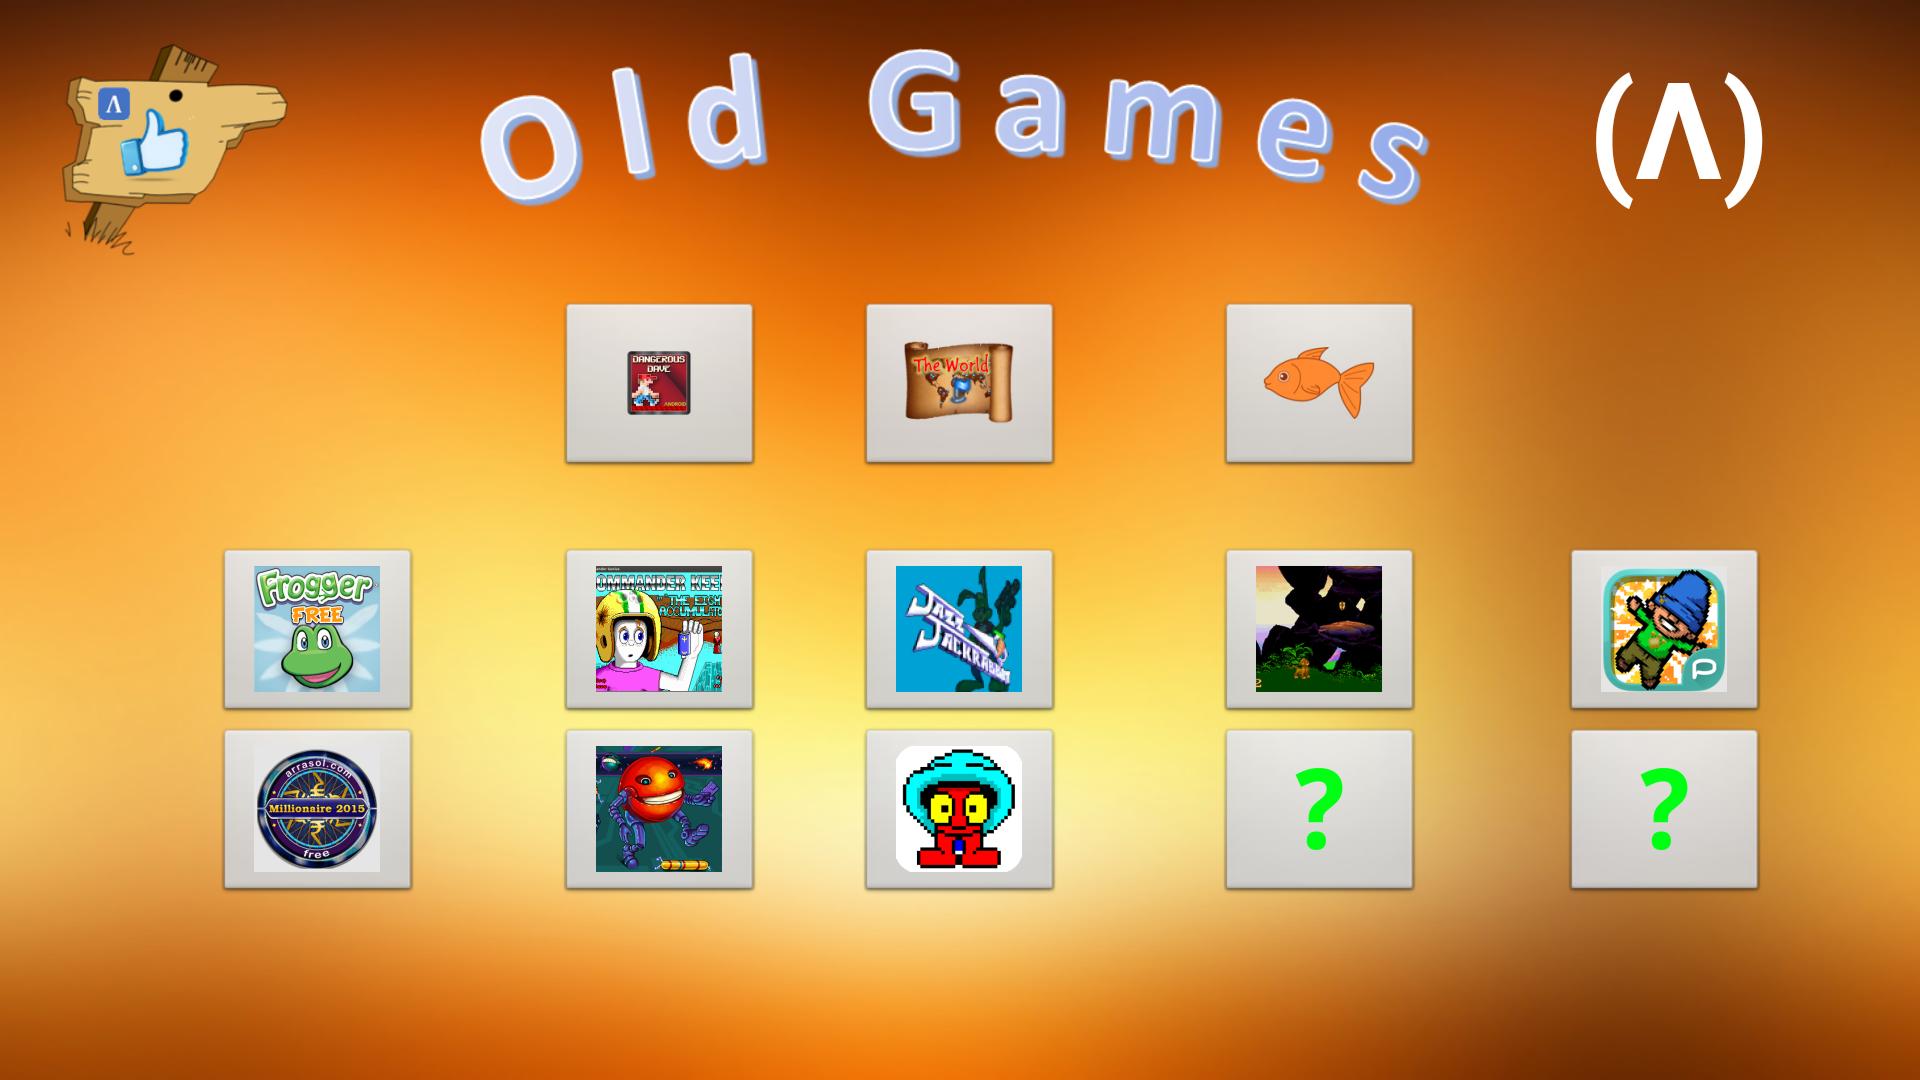 Dave Old Games For Android Apk Download - old roblox 2015 download mobile